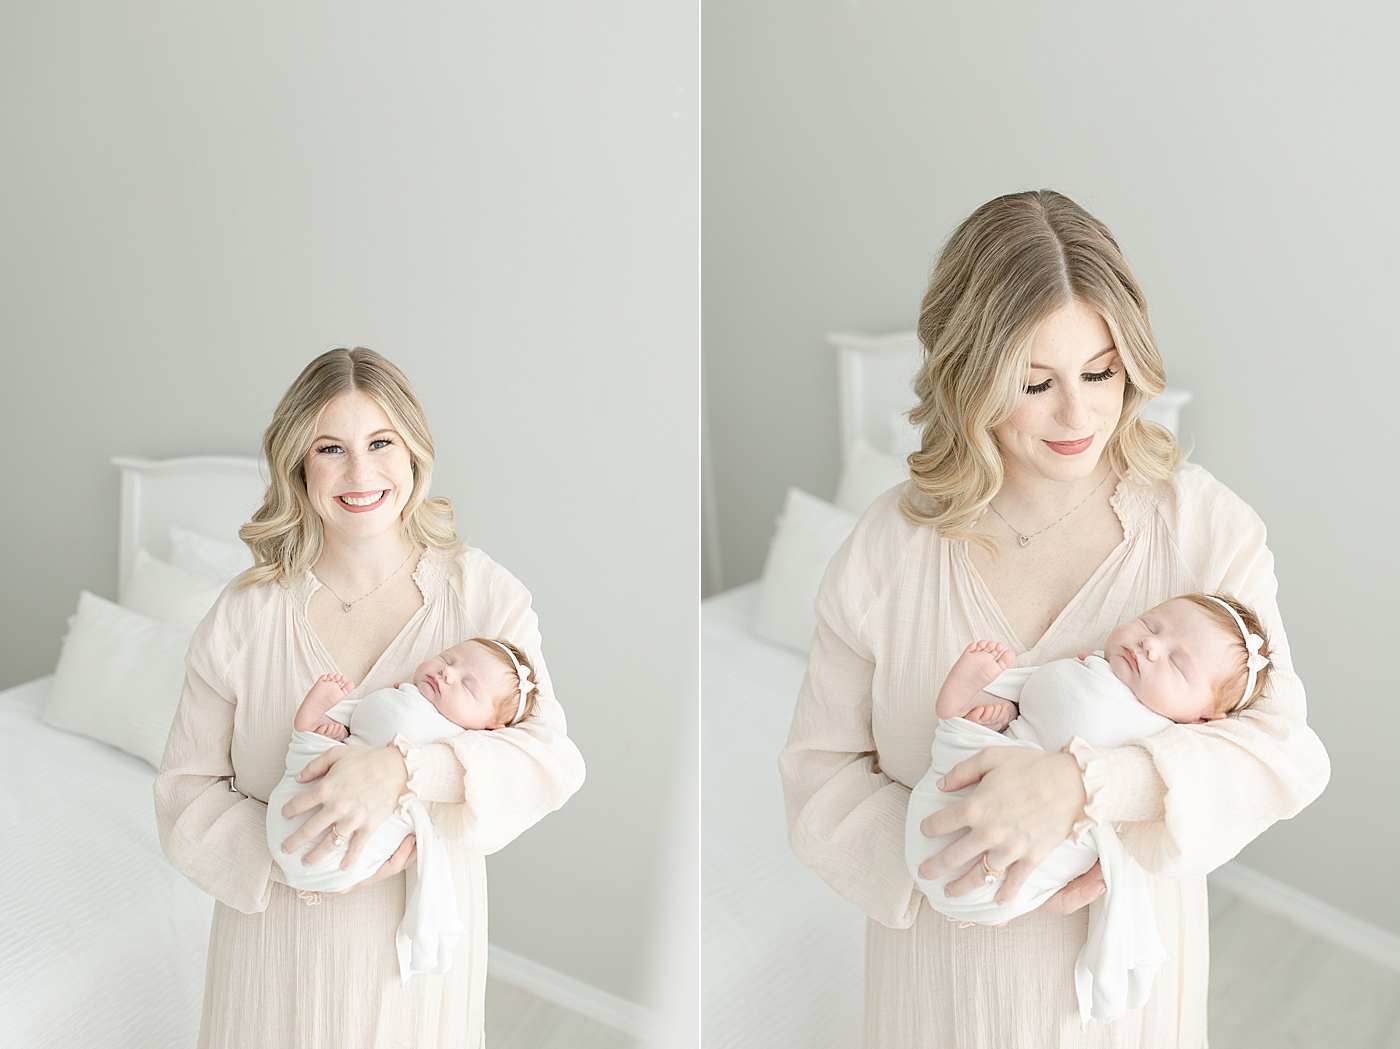 Mom in cream dress smiling while holding her newborn baby girl | Photo by Little Sunshine Photography